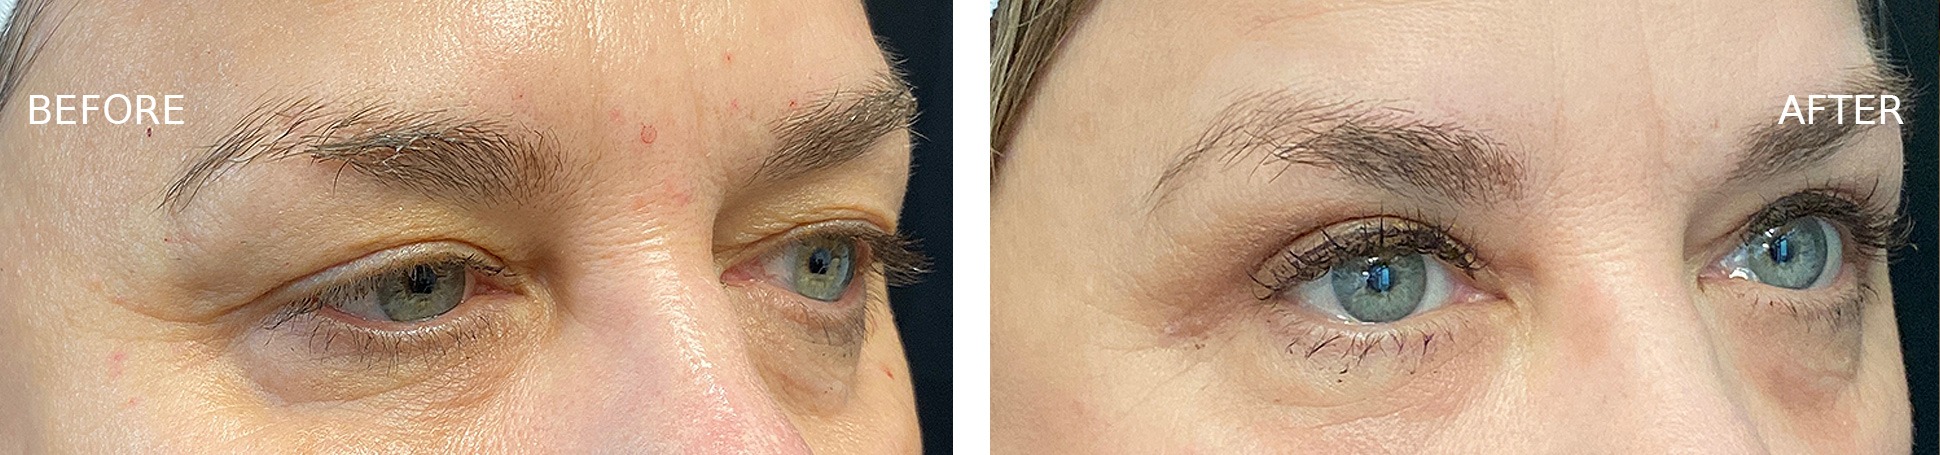 Woman's Eyes Before and After AccuTite